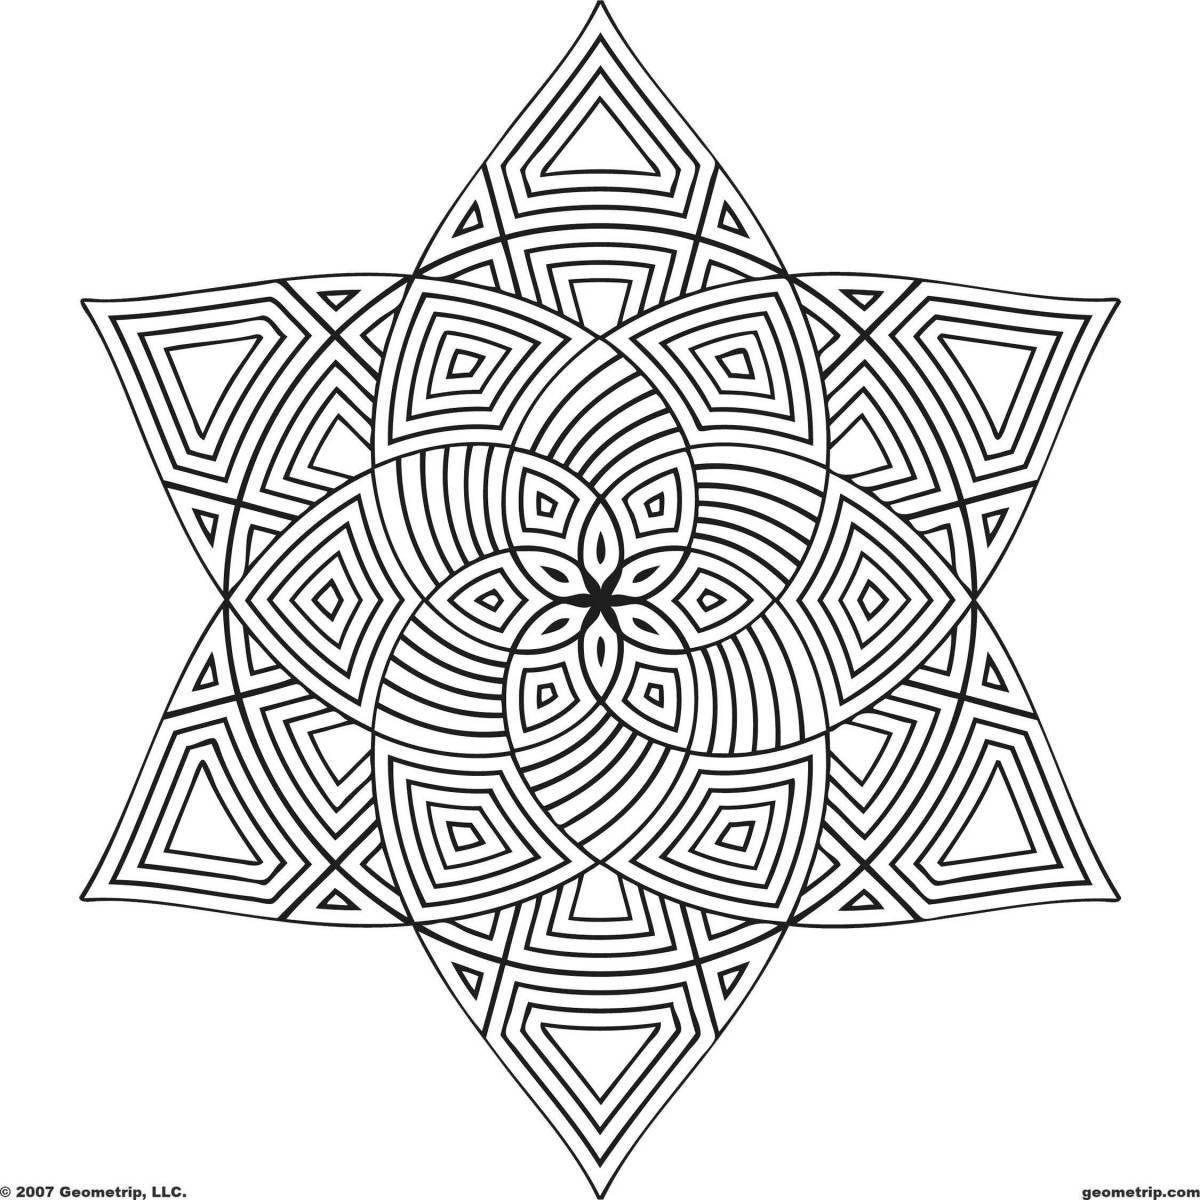 Impressive geometry coloring page